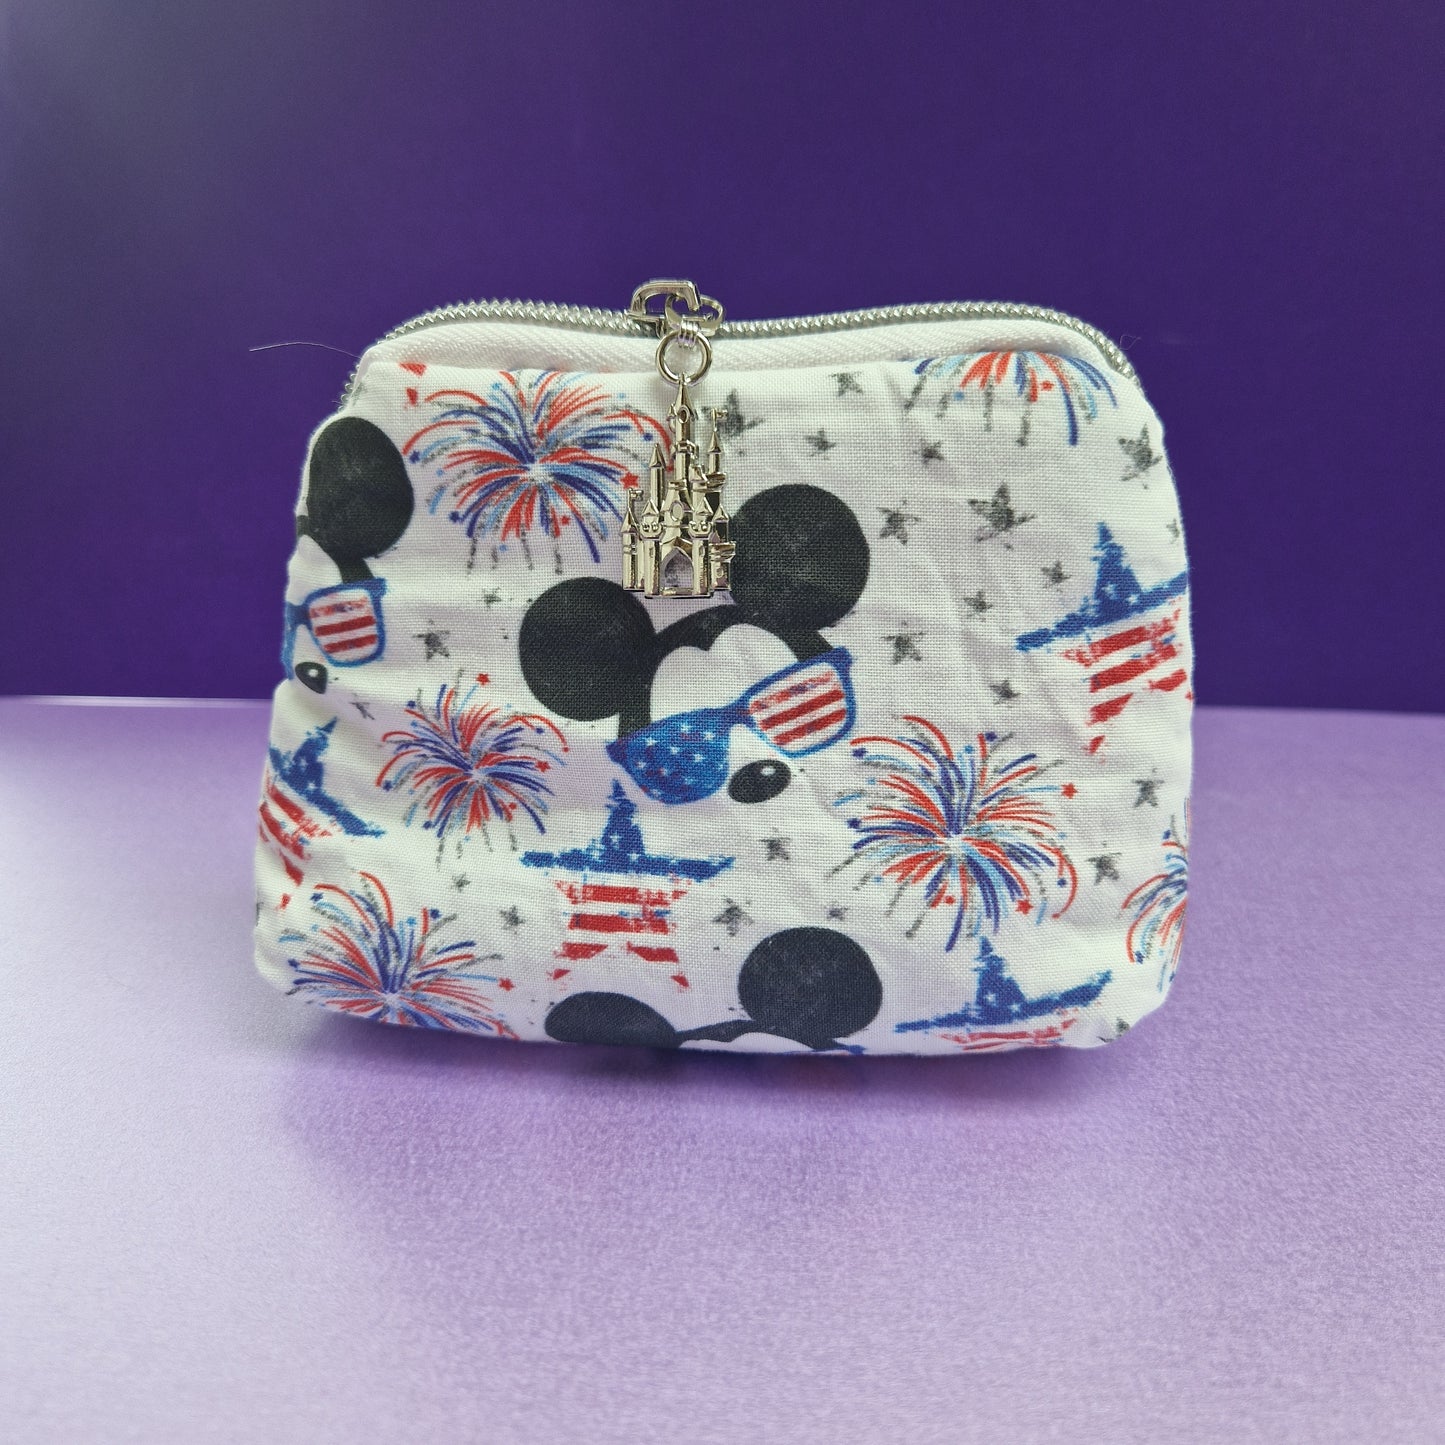 America Mouse mini triangle shaped pouch cosmetic bag with castle zipper pull